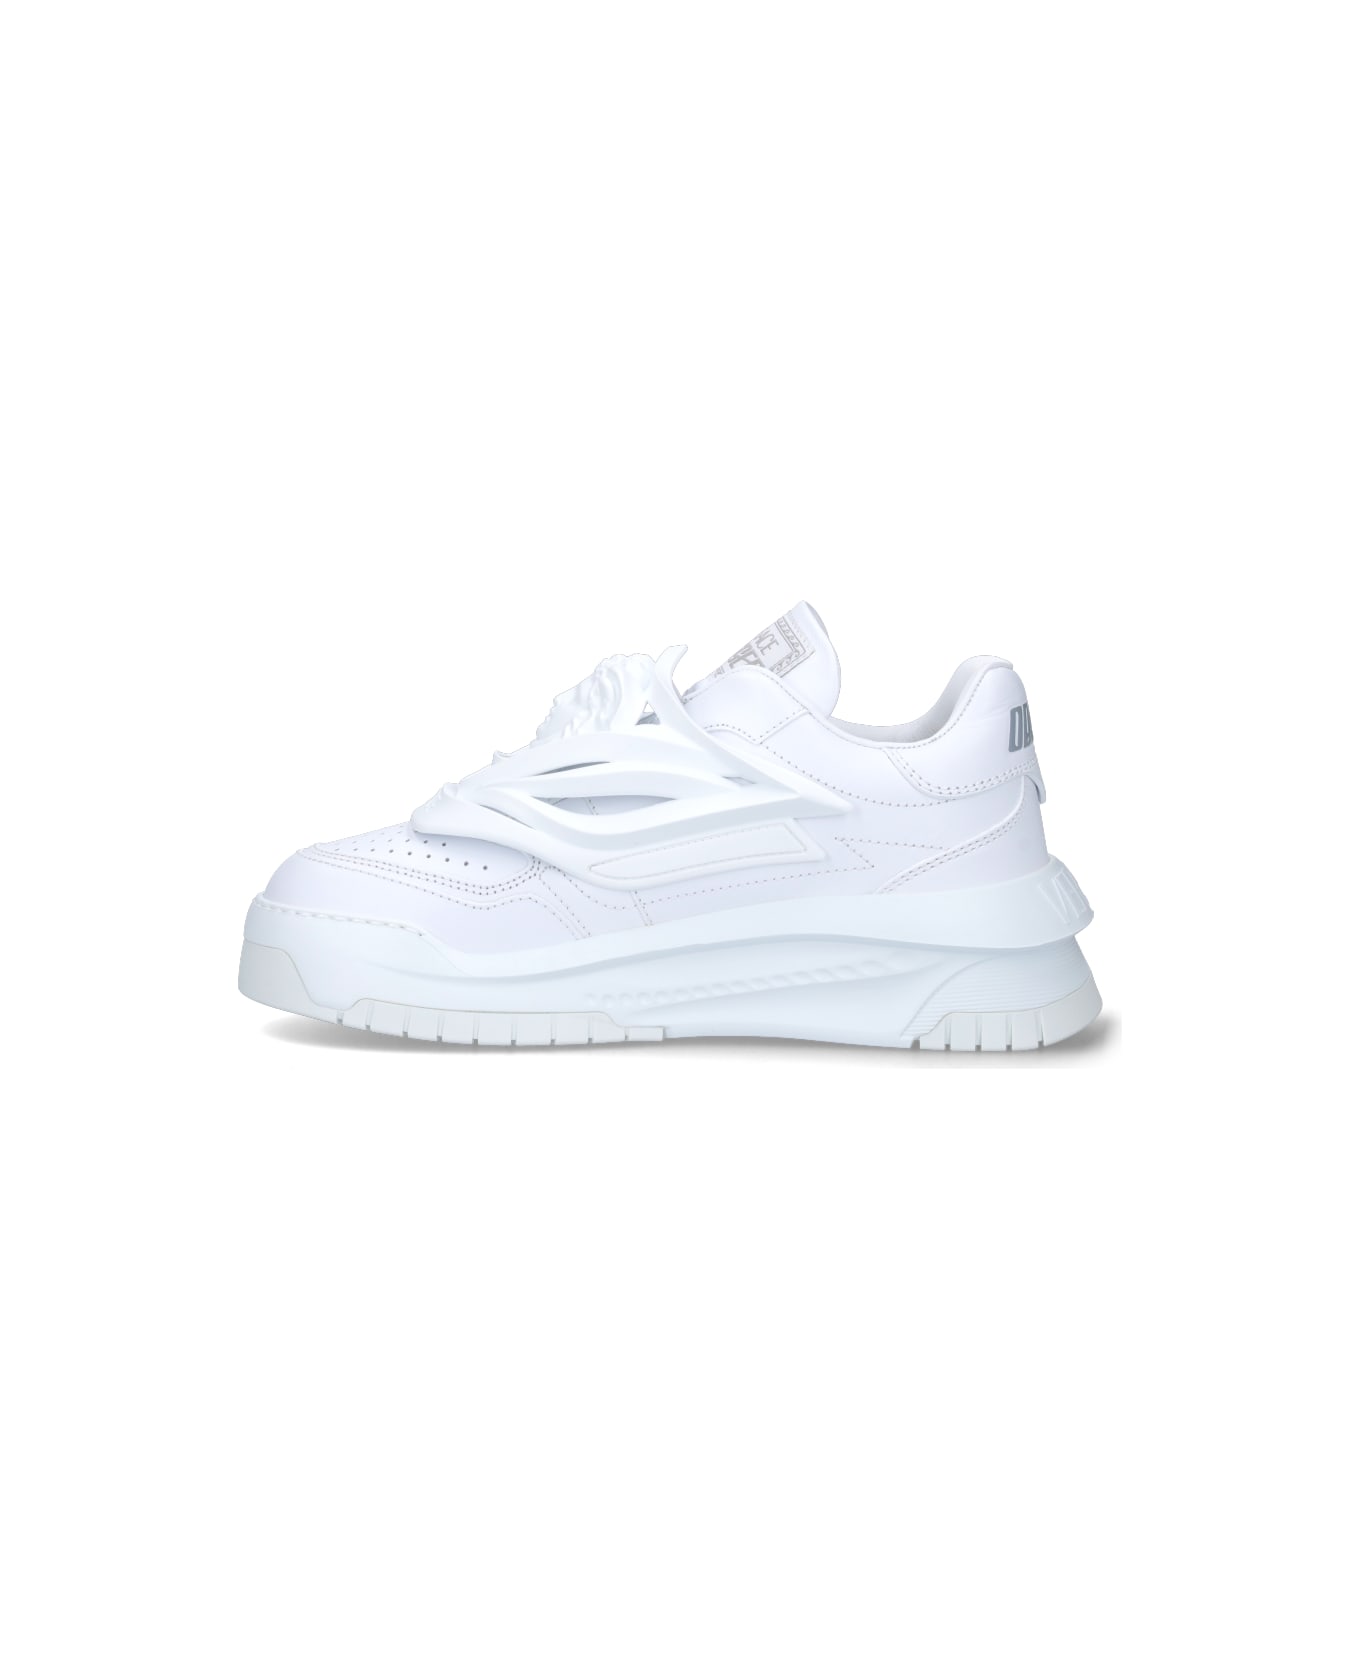 Versace "odissea" Sneakers - White